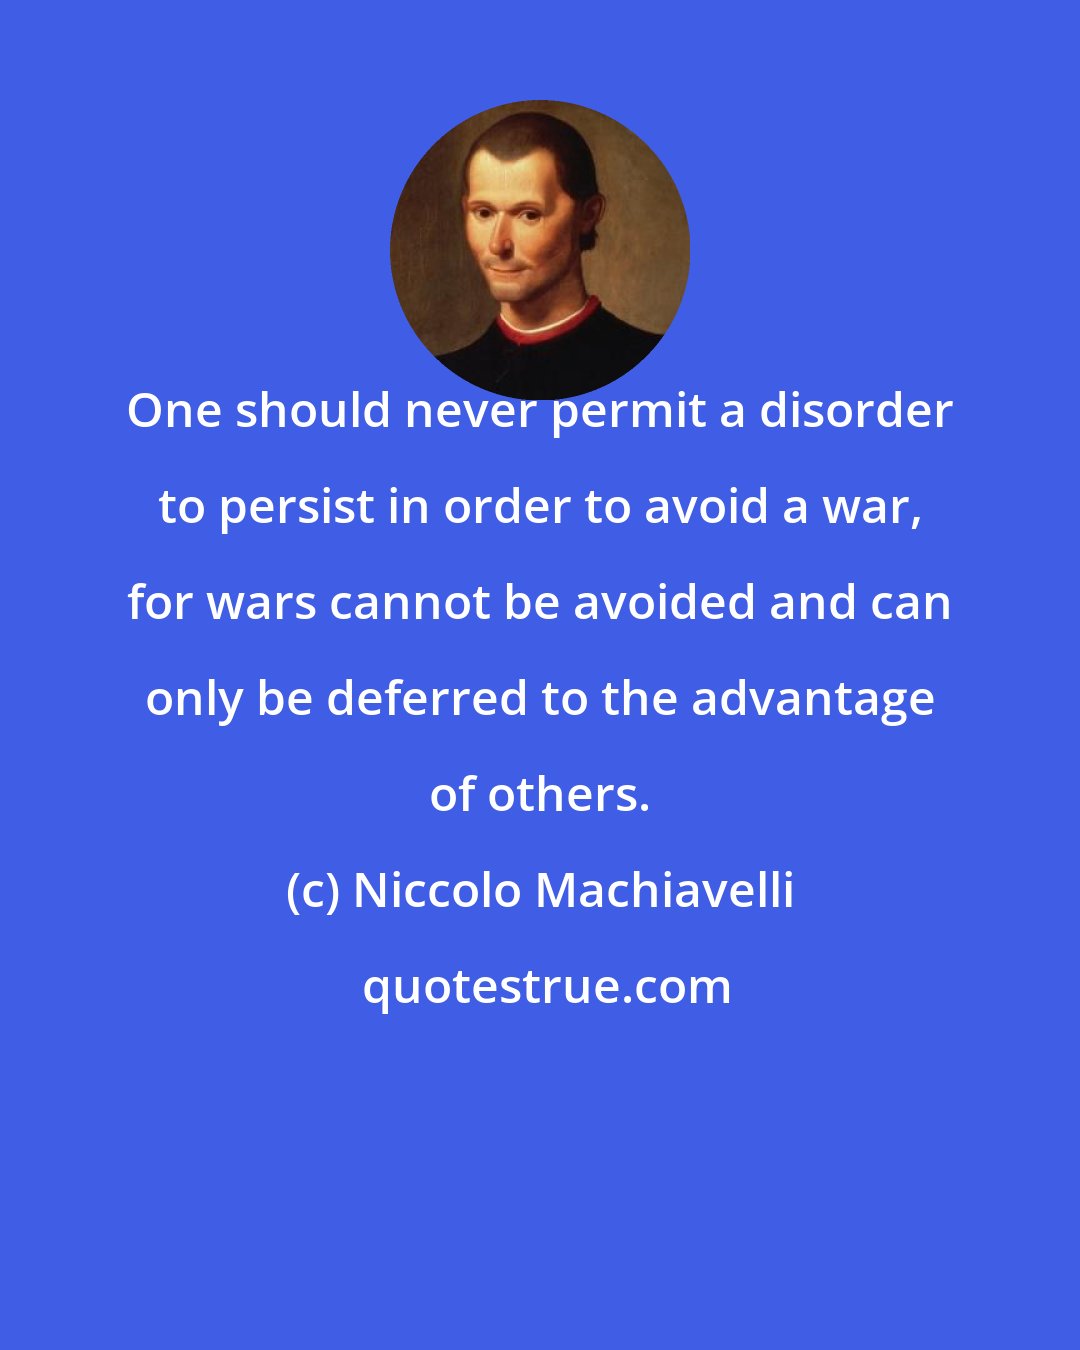 Niccolo Machiavelli: One should never permit a disorder to persist in order to avoid a war, for wars cannot be avoided and can only be deferred to the advantage of others.